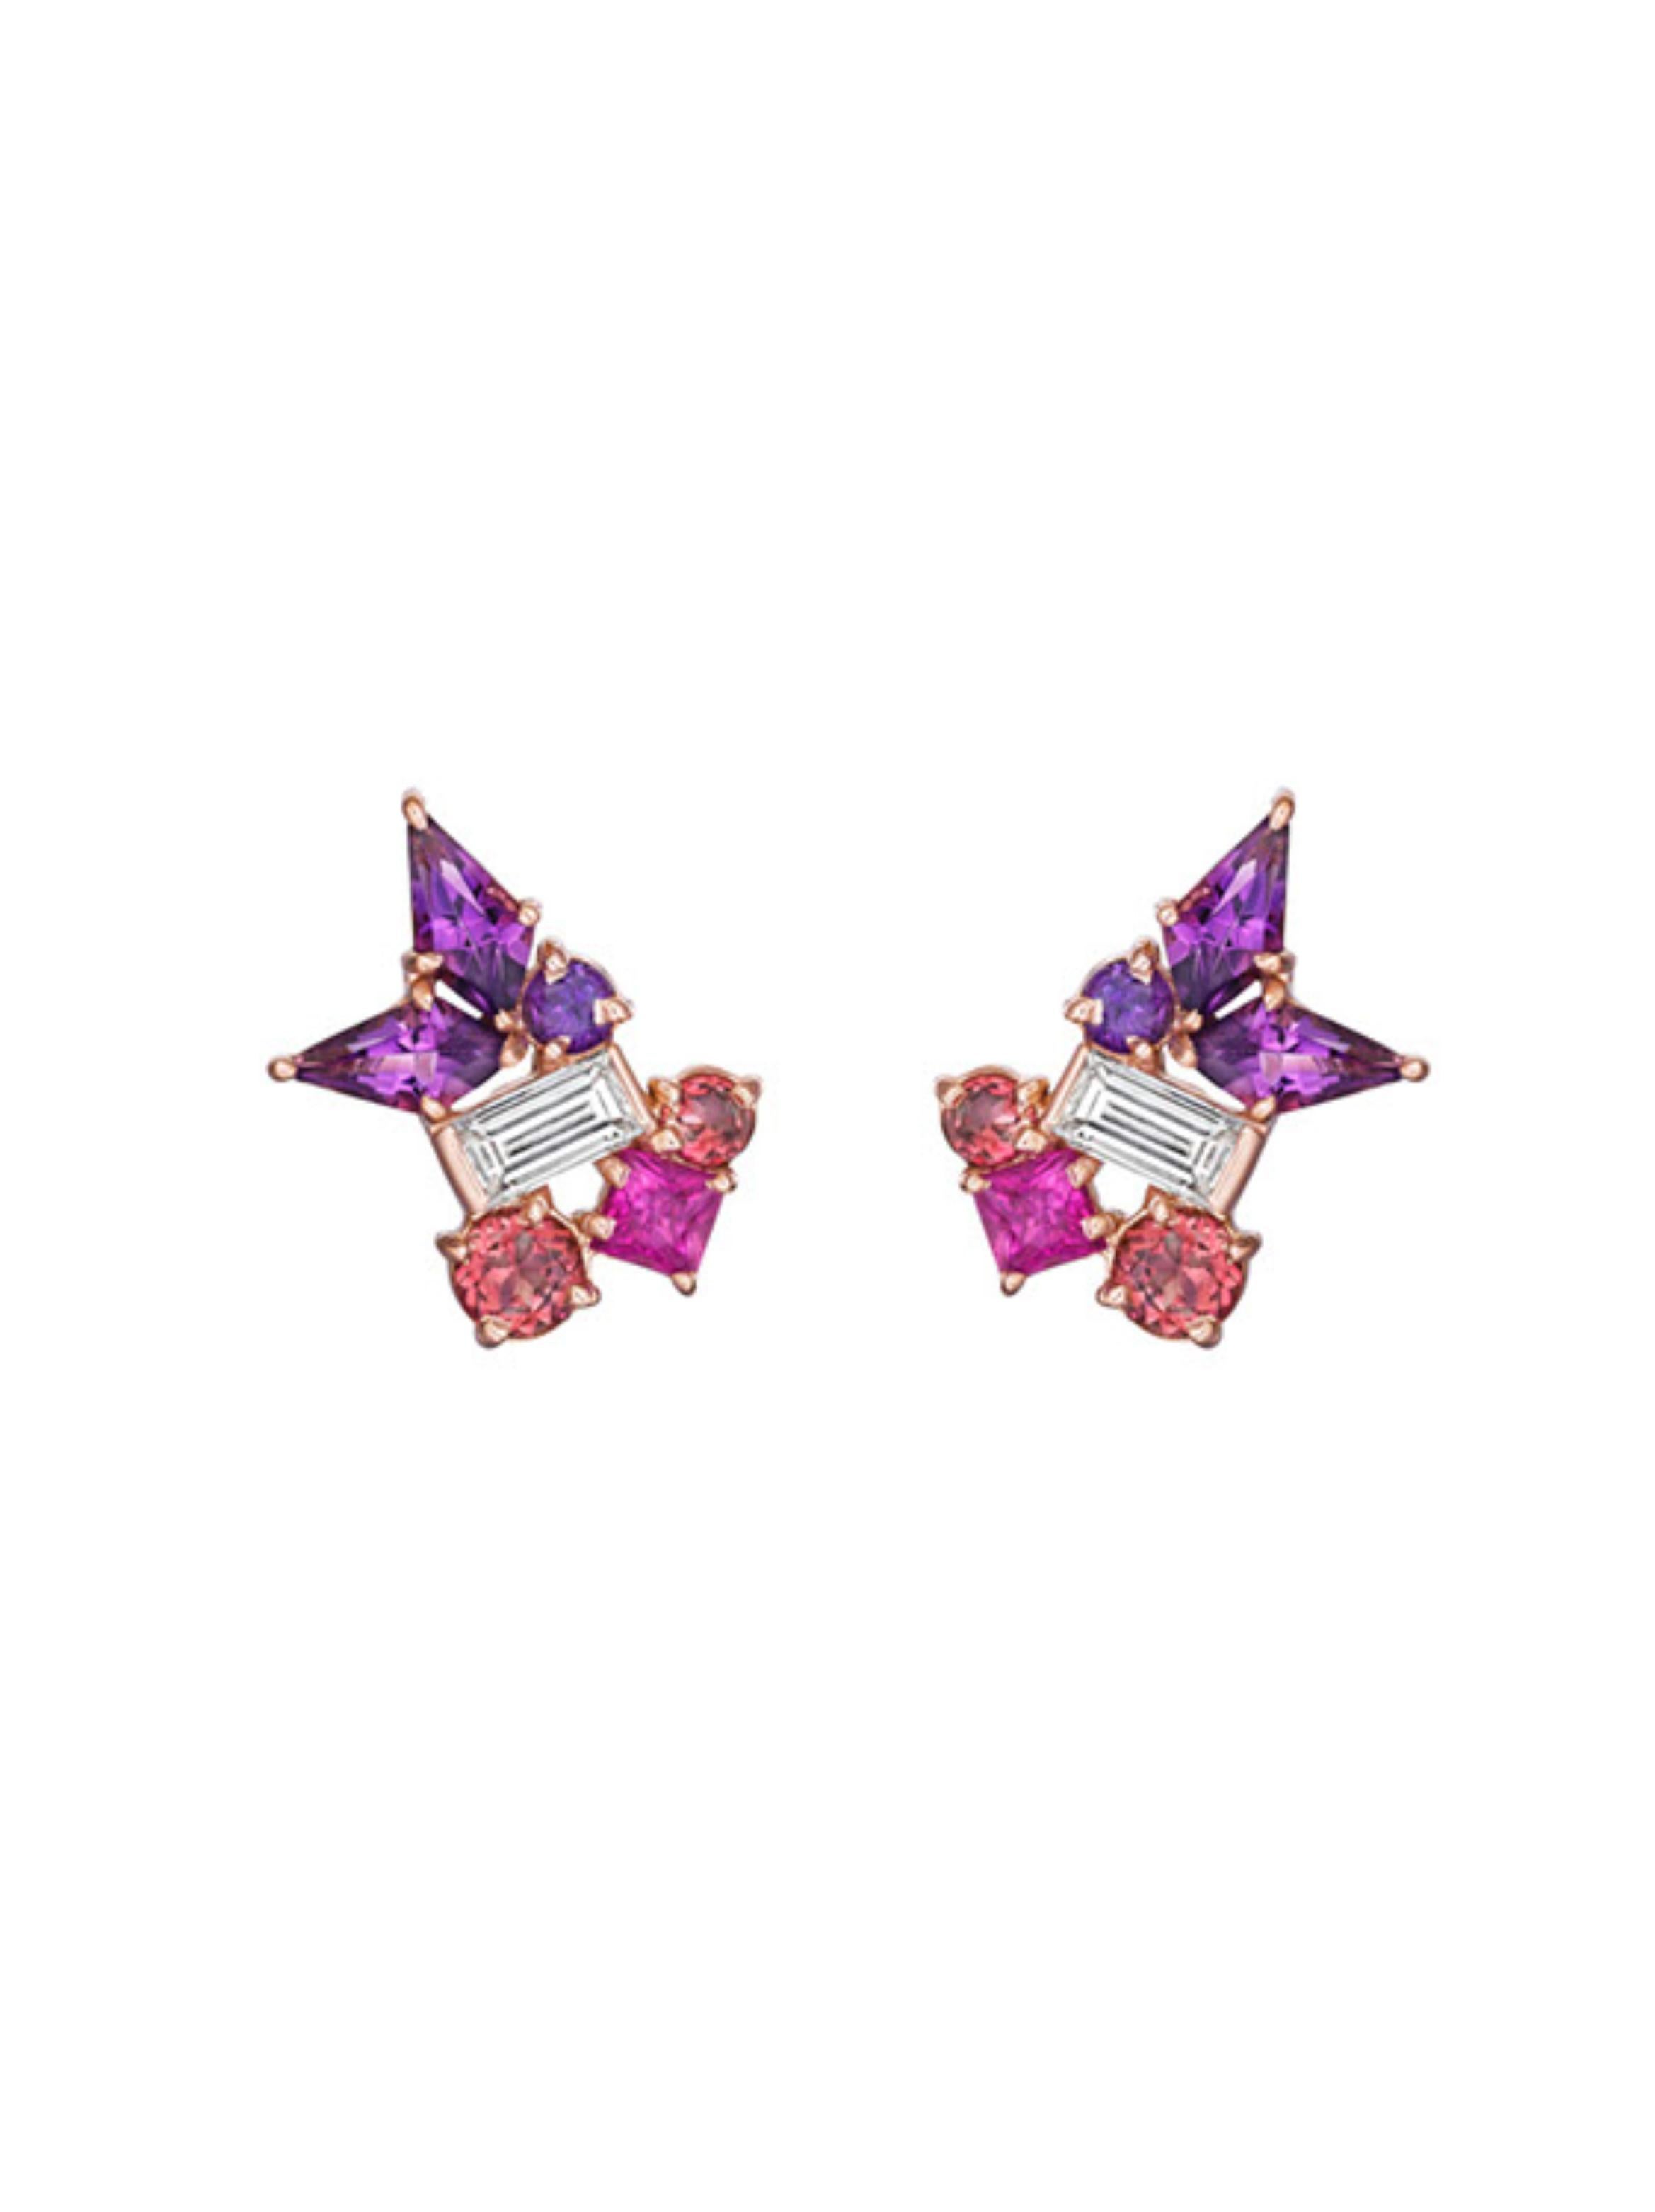 Specs: 18k yellow gold Melting Ice kite stud earrings with 0.30 carats of white diamond, 0.30 carats of amethyst and 0.30 carats of pink sapphires. 

Story: The Melting Ice collection by MadStone designer Kerri Halpern draws influence from its